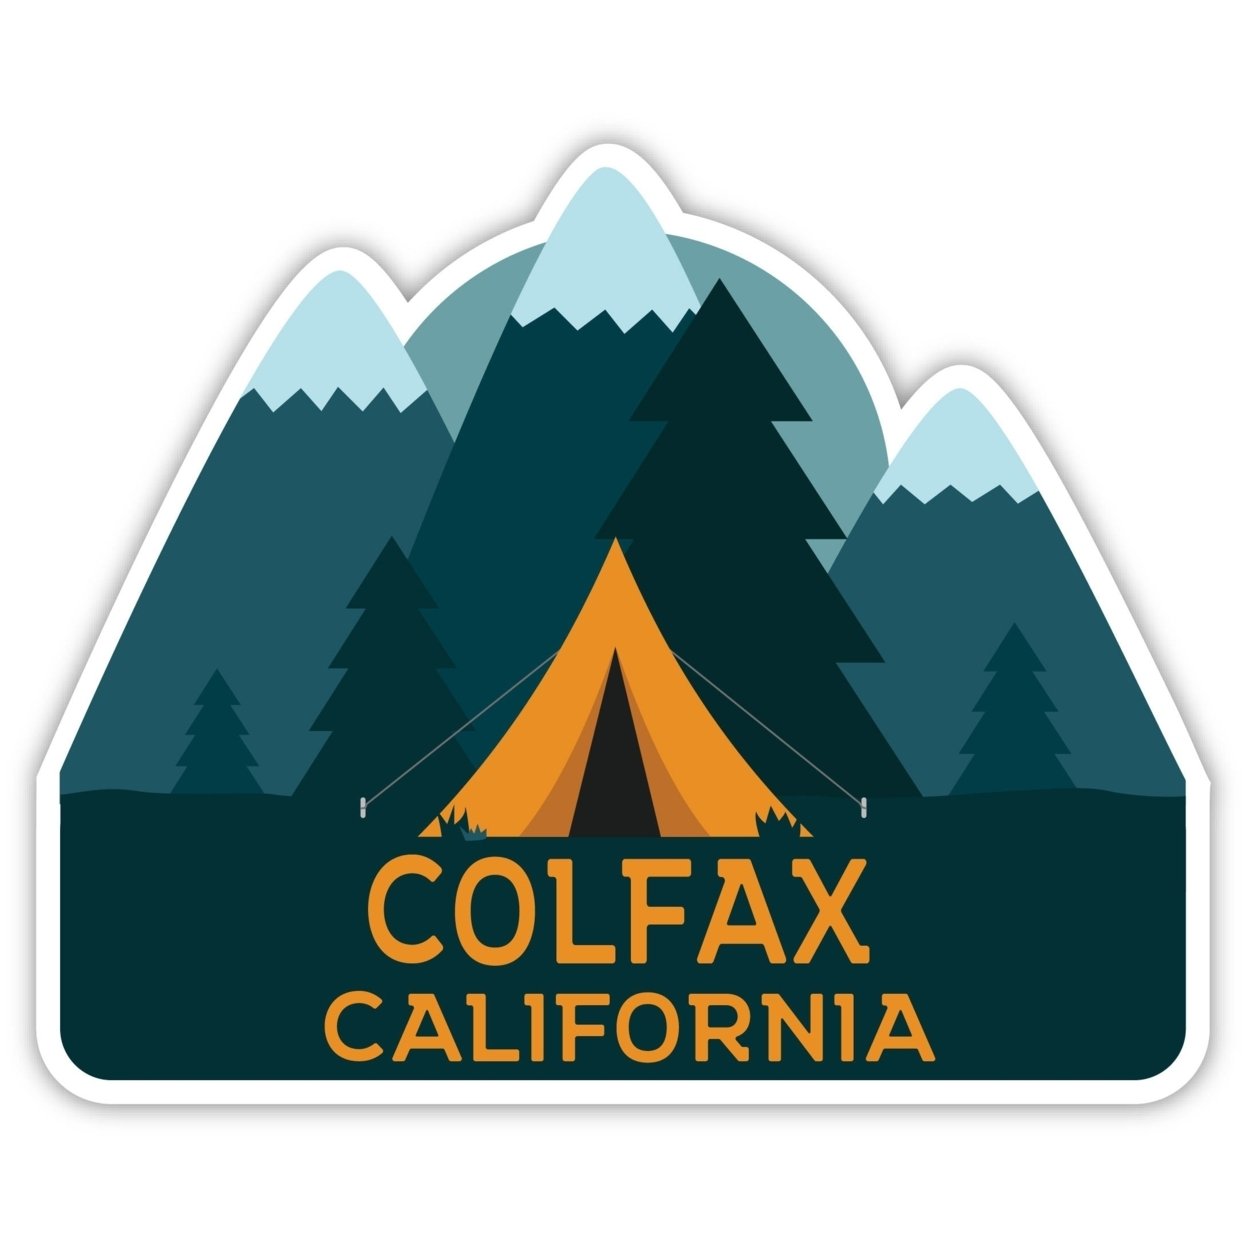 Colfax California Souvenir Decorative Stickers (Choose Theme And Size) - 4-Pack, 8-Inch, Tent